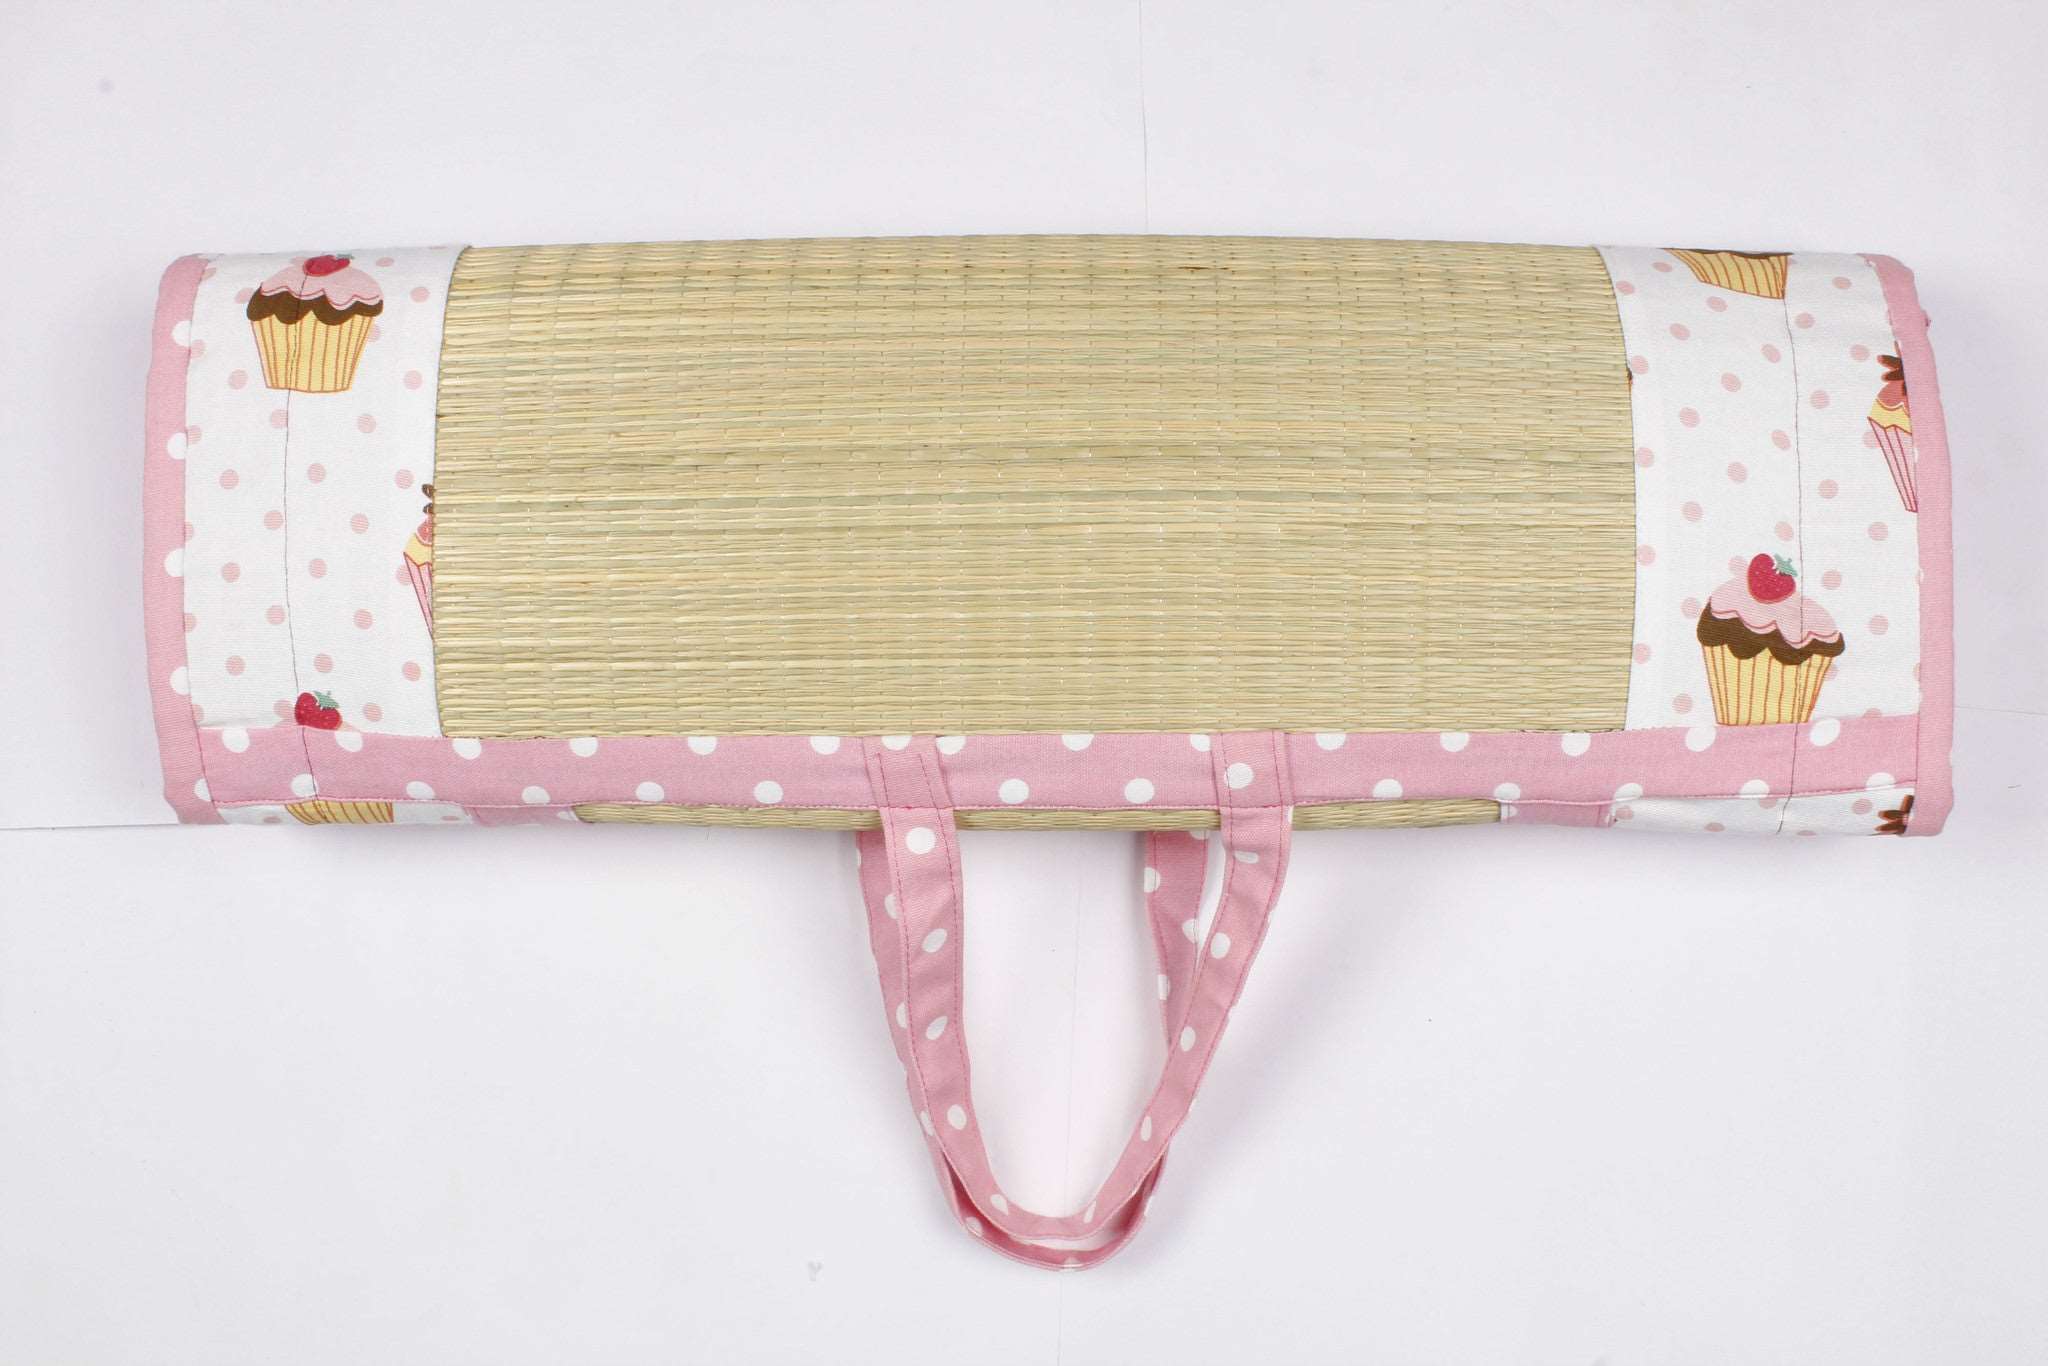 Baby Travel Bed - Cup Cakes Pink